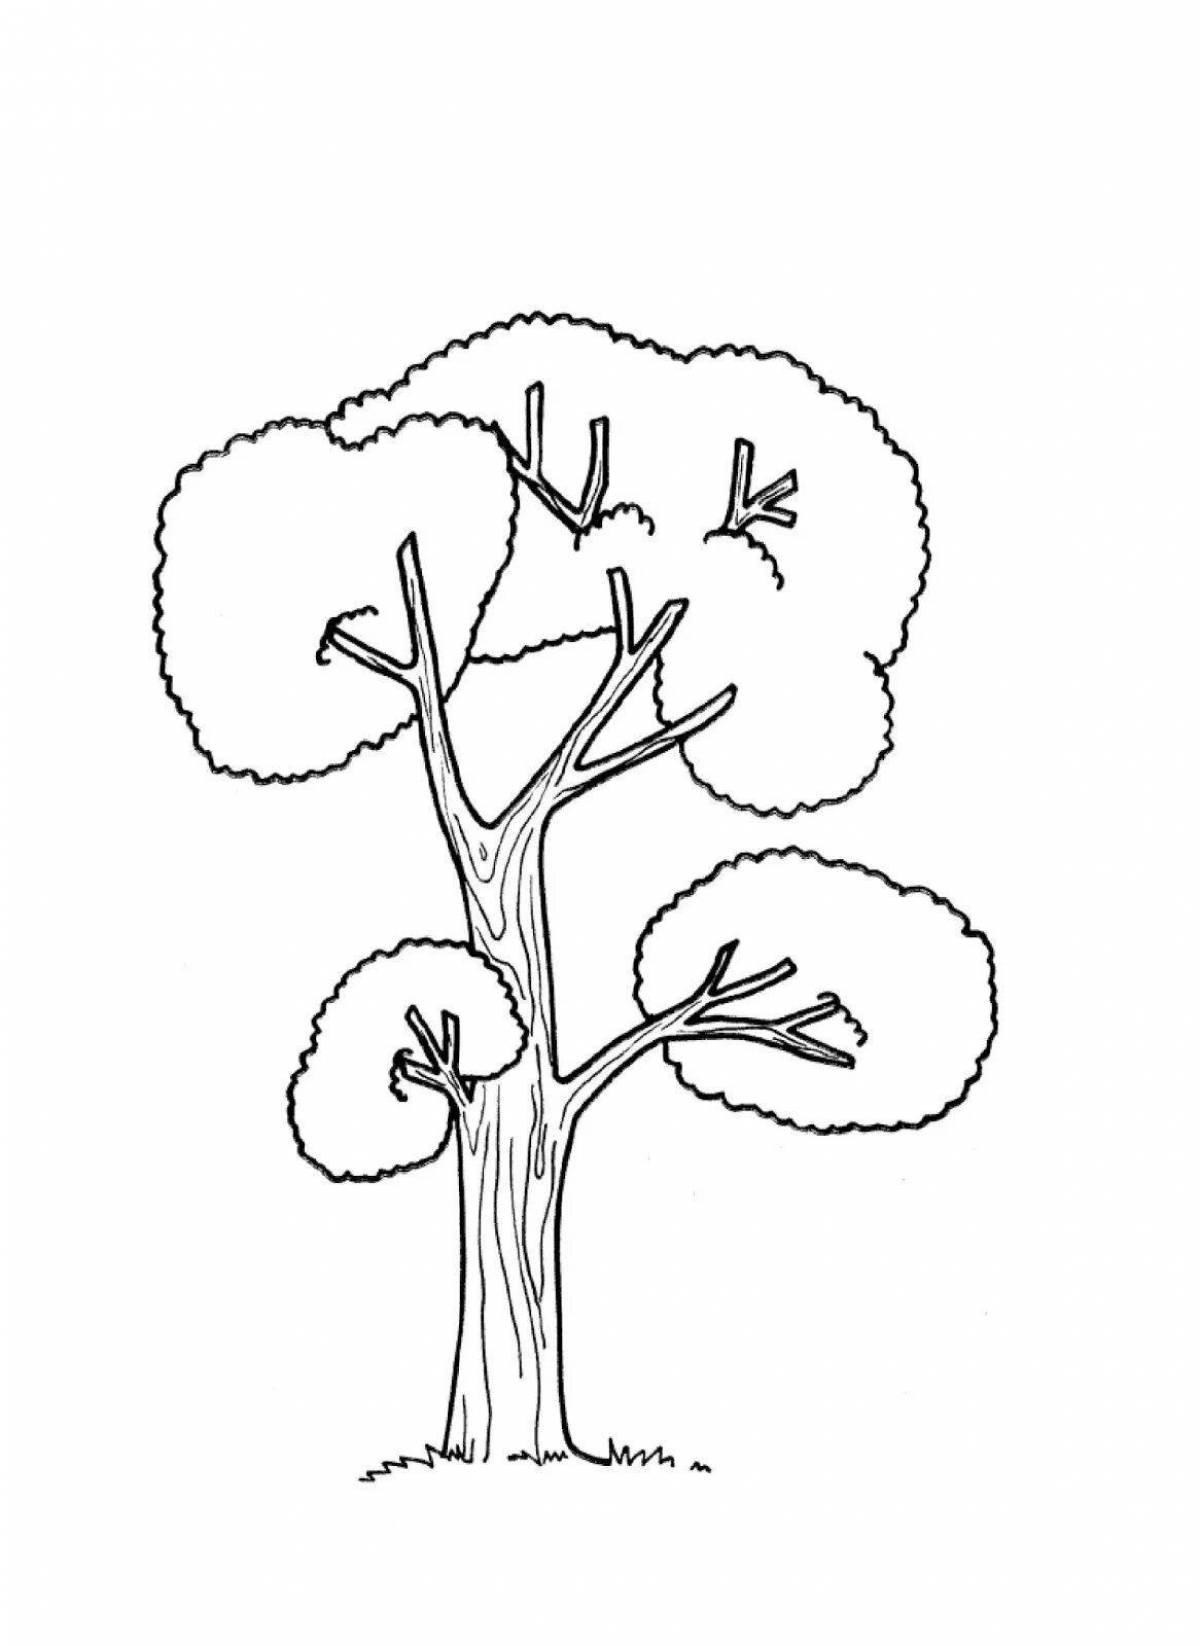 Tempting winter plants coloring pages